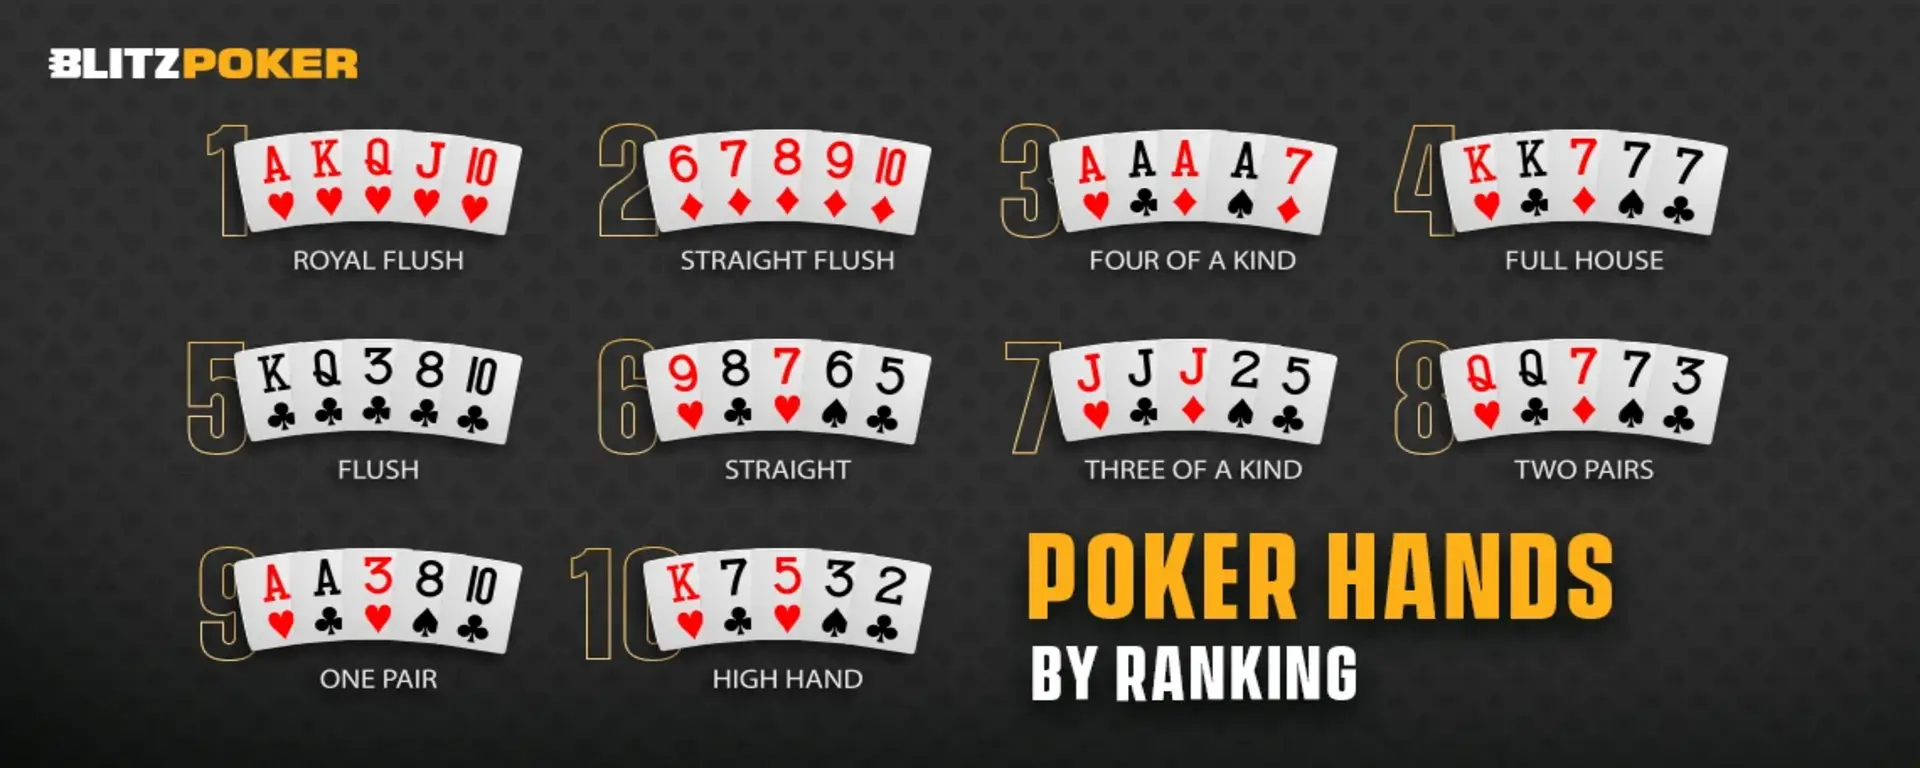 Poker Hands by Ranking